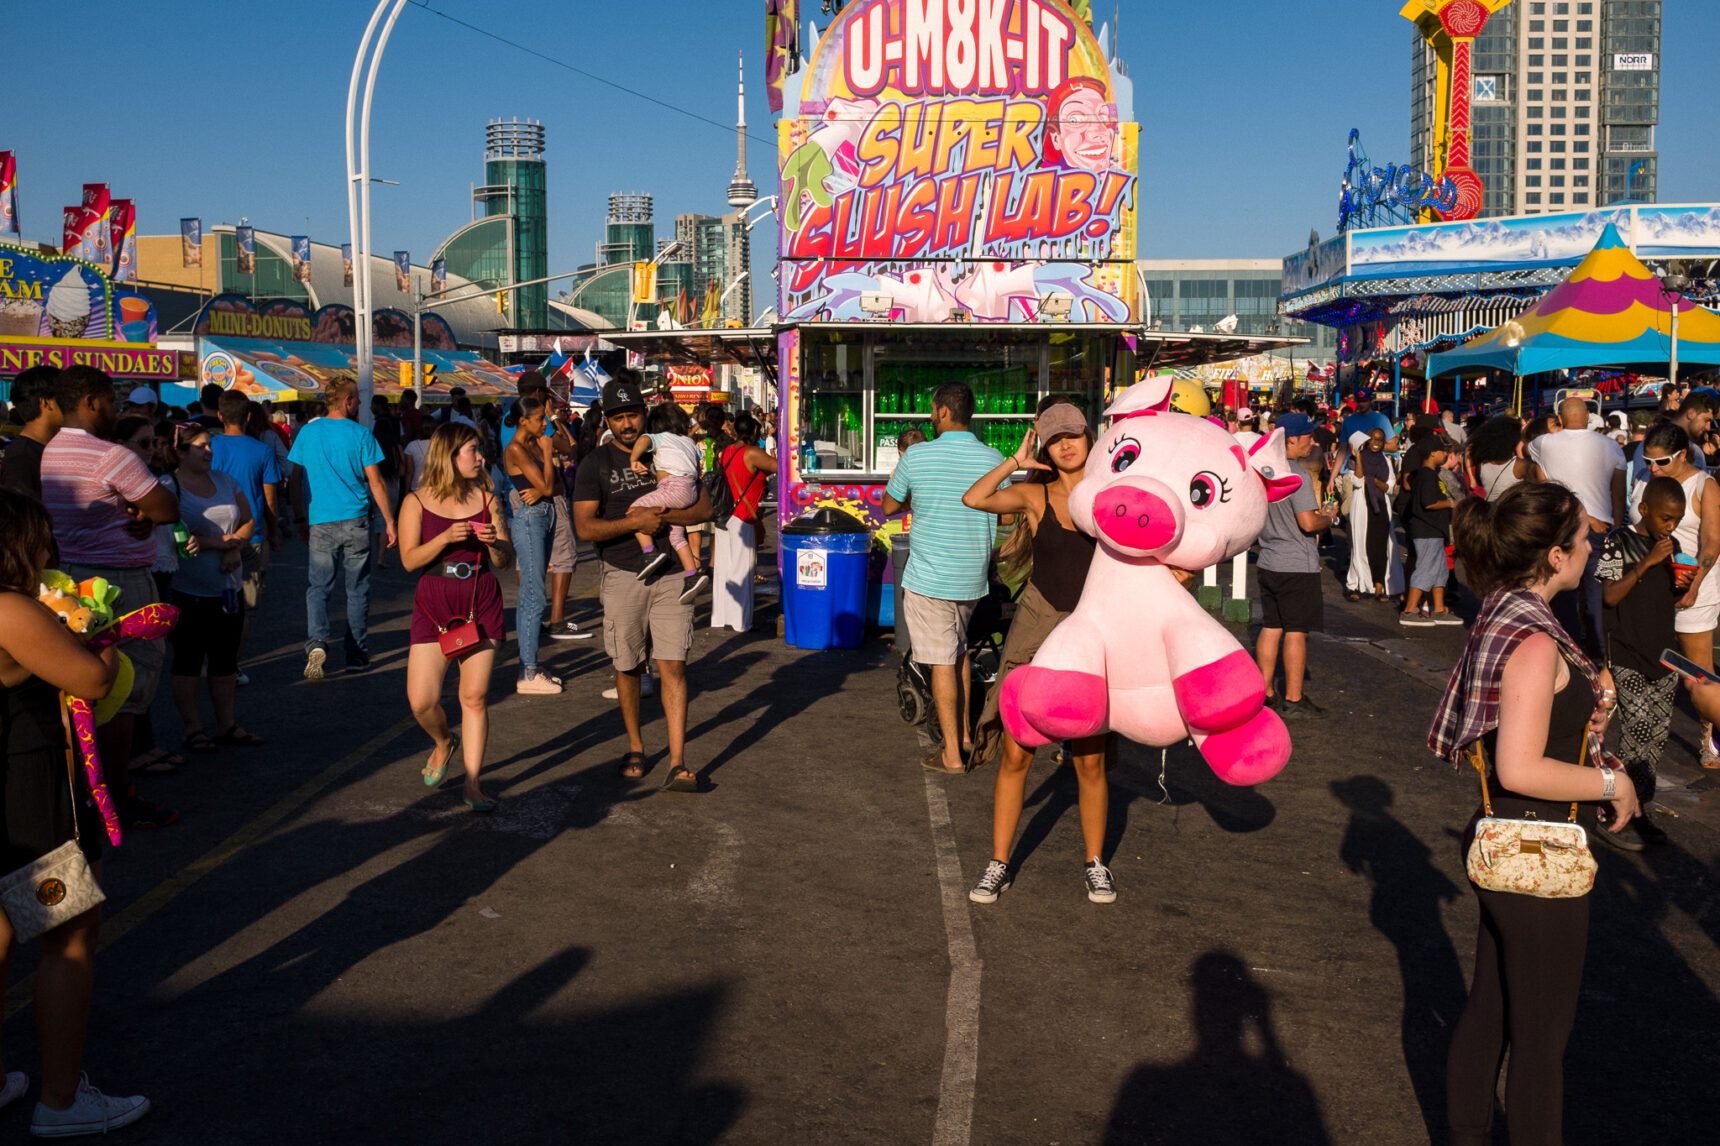 Street Photographer's Guide To CNE - Dealing With Crowds